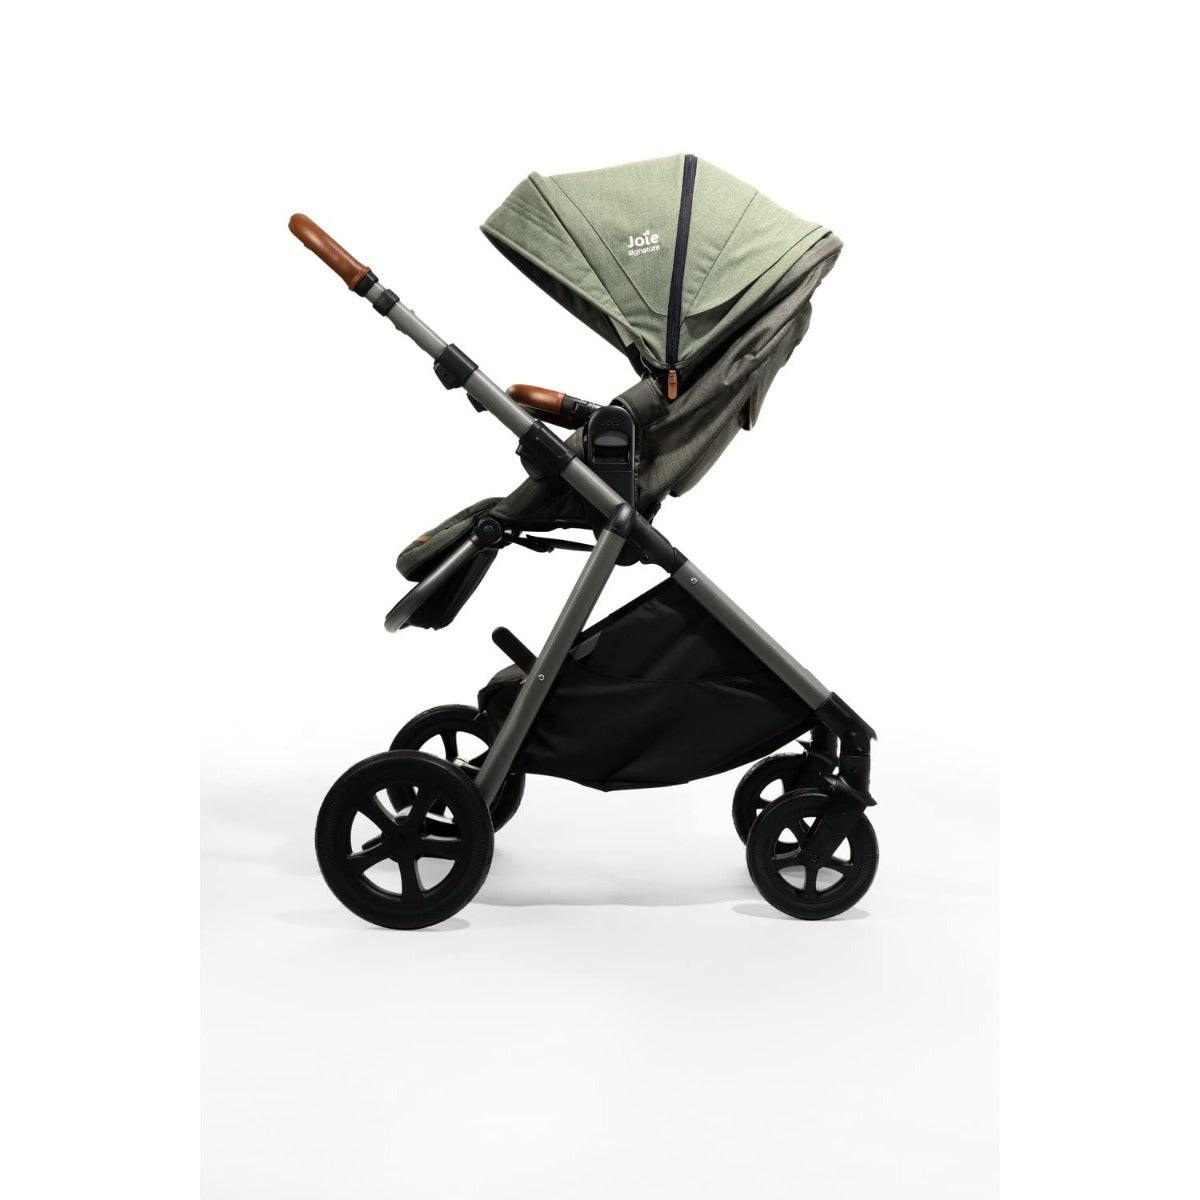 Joie Aeria 4 in 1 Baby Pram with Height Adjustable Seat & Rain Cover - Baby Stroller for Ages 0-4 Years